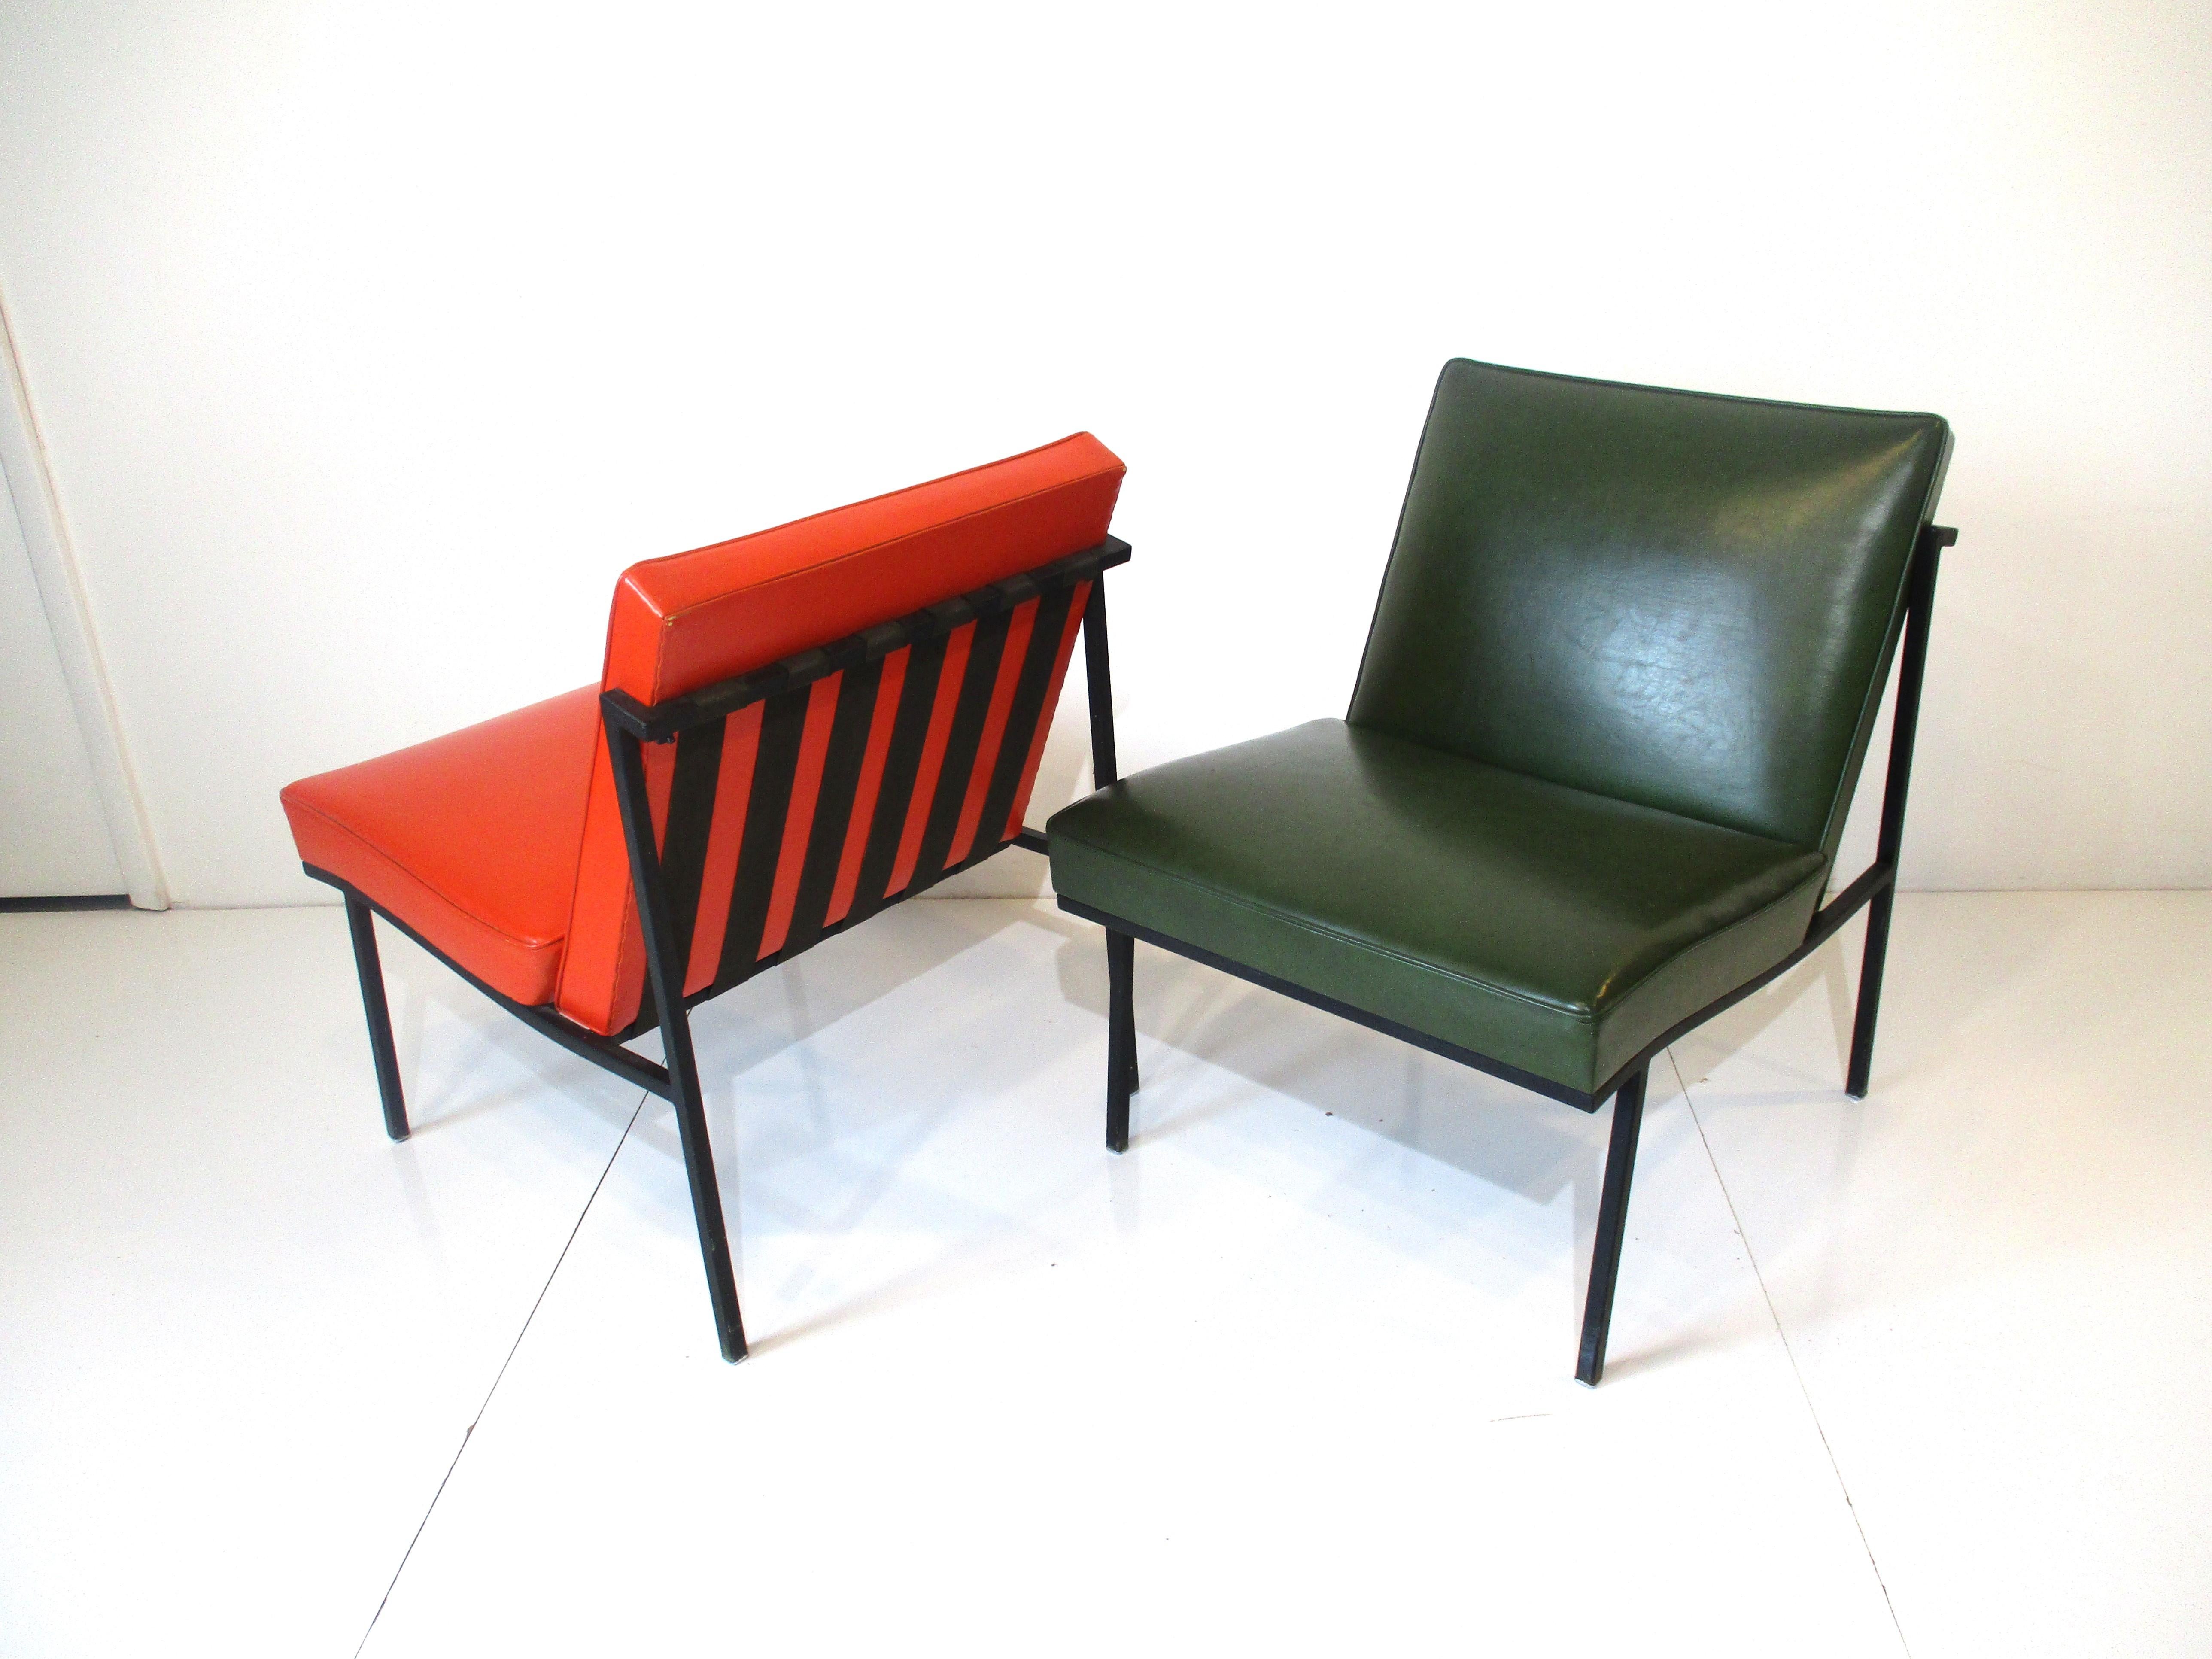 American Rare William Armbruster Lounge Chairs MOMA Good Design for Edgewood Co. 